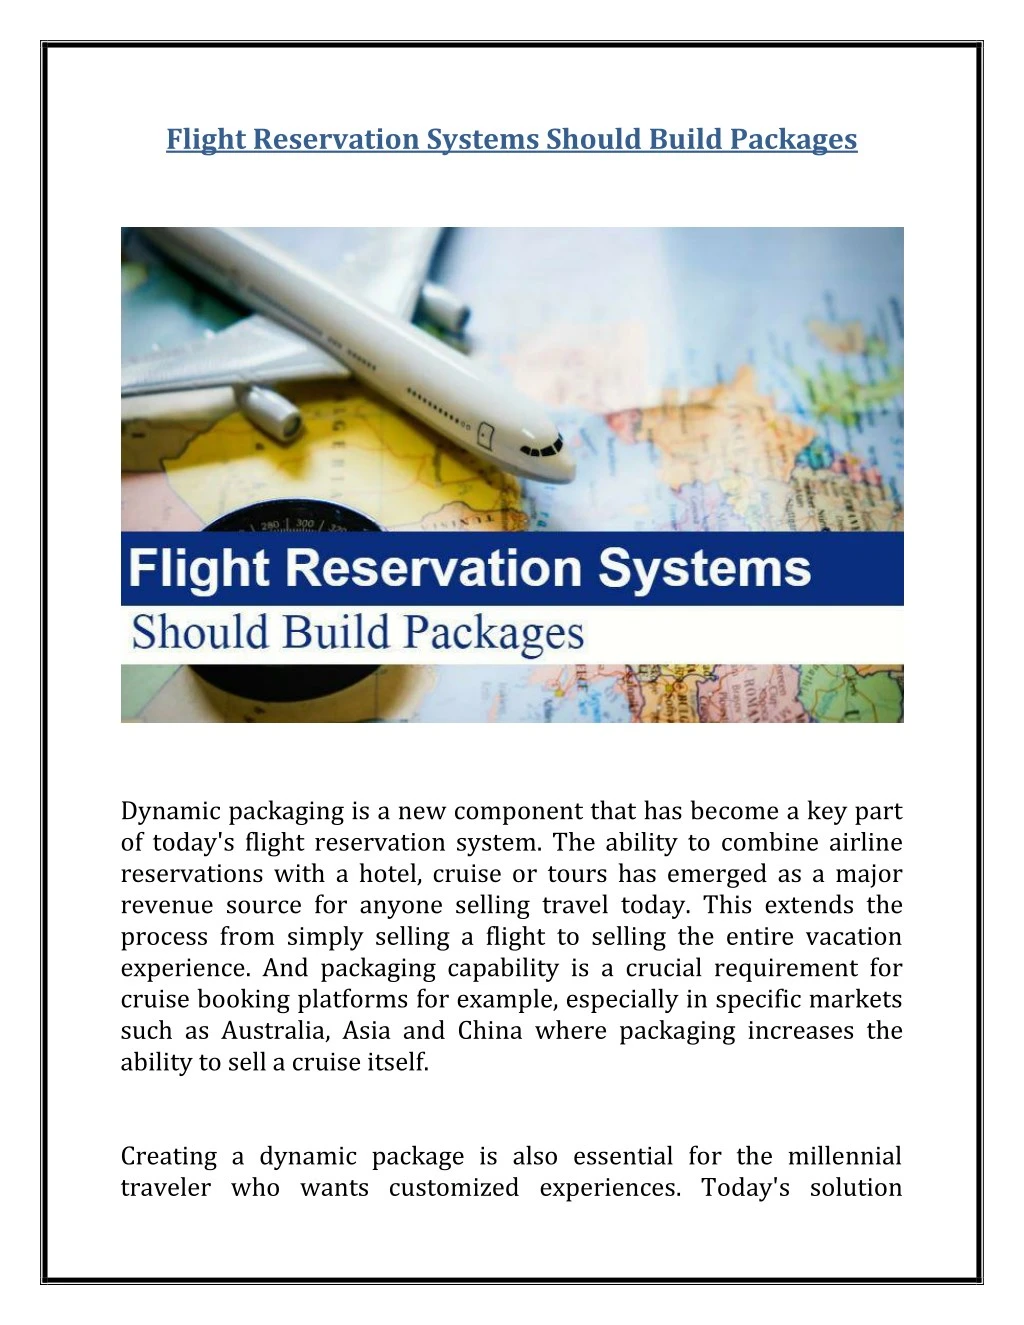 flight reservation systems should build packages